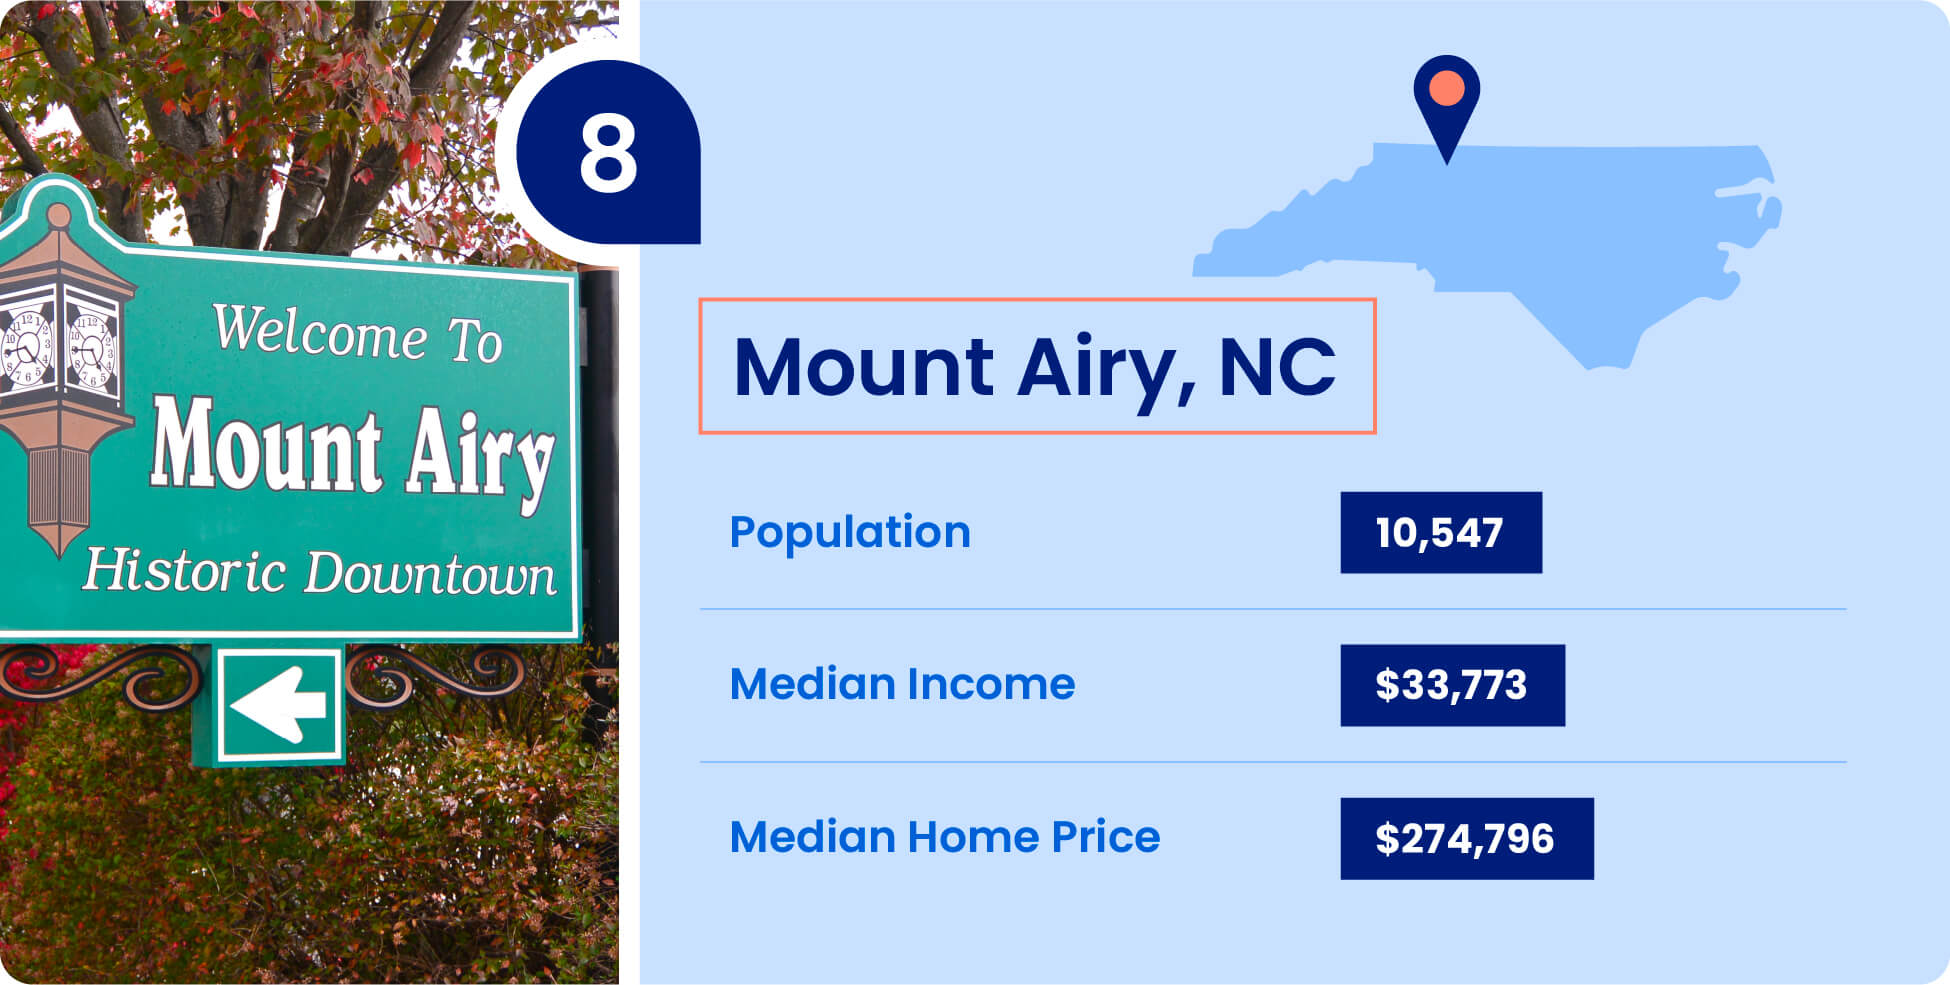 Population, median income, and median home price for Mount Airy, one of the cheapest places to live in North Carolina.